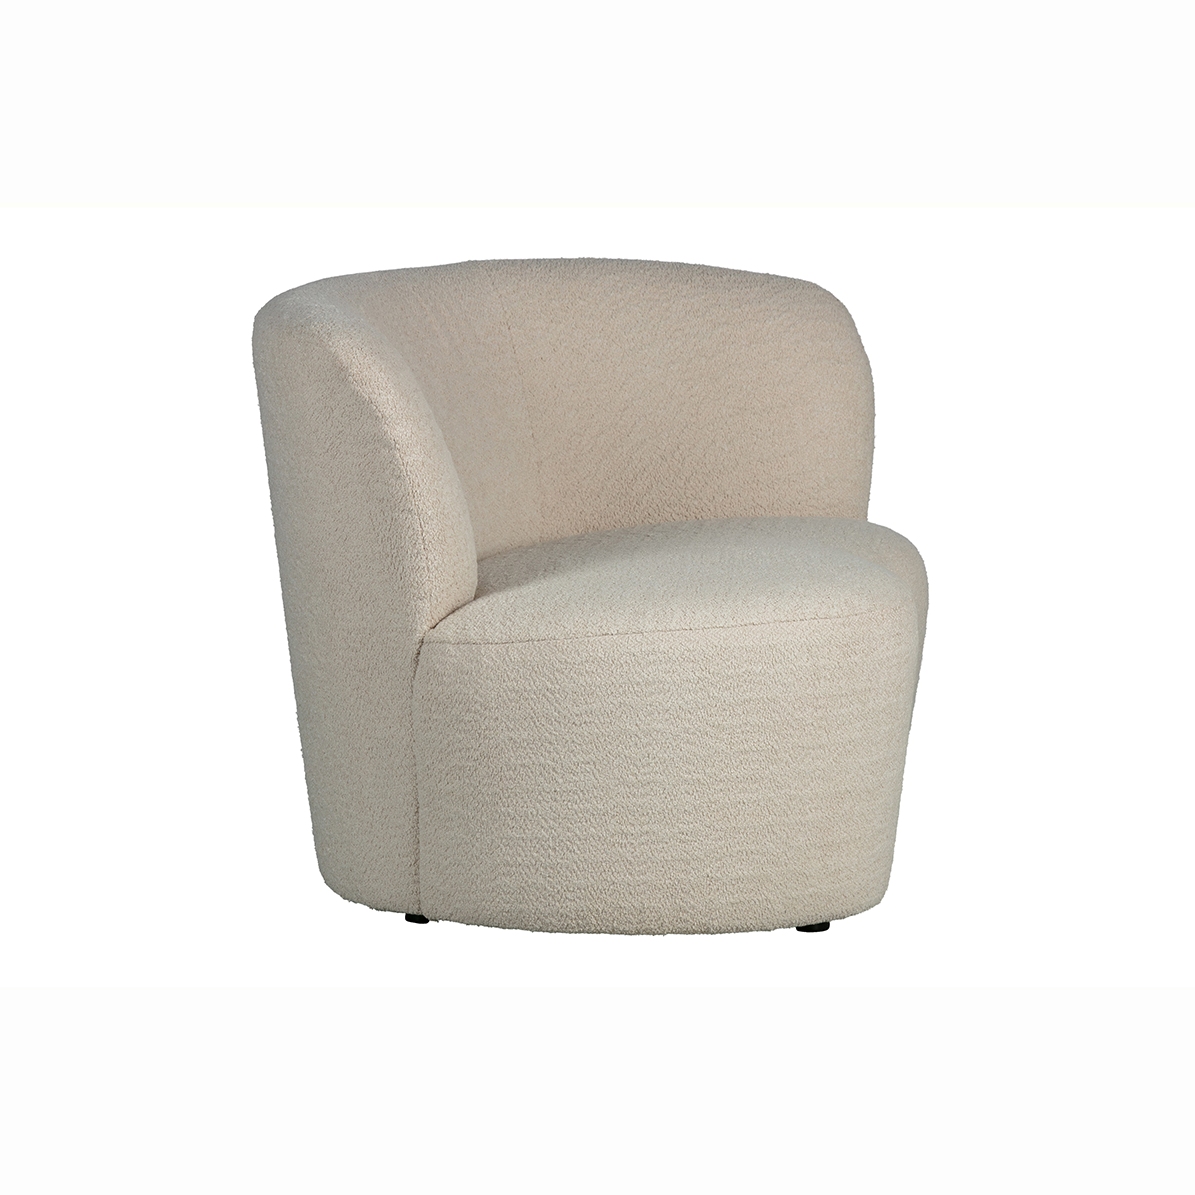 STONE RIGHT CREME LOUNGE CHAIR 2